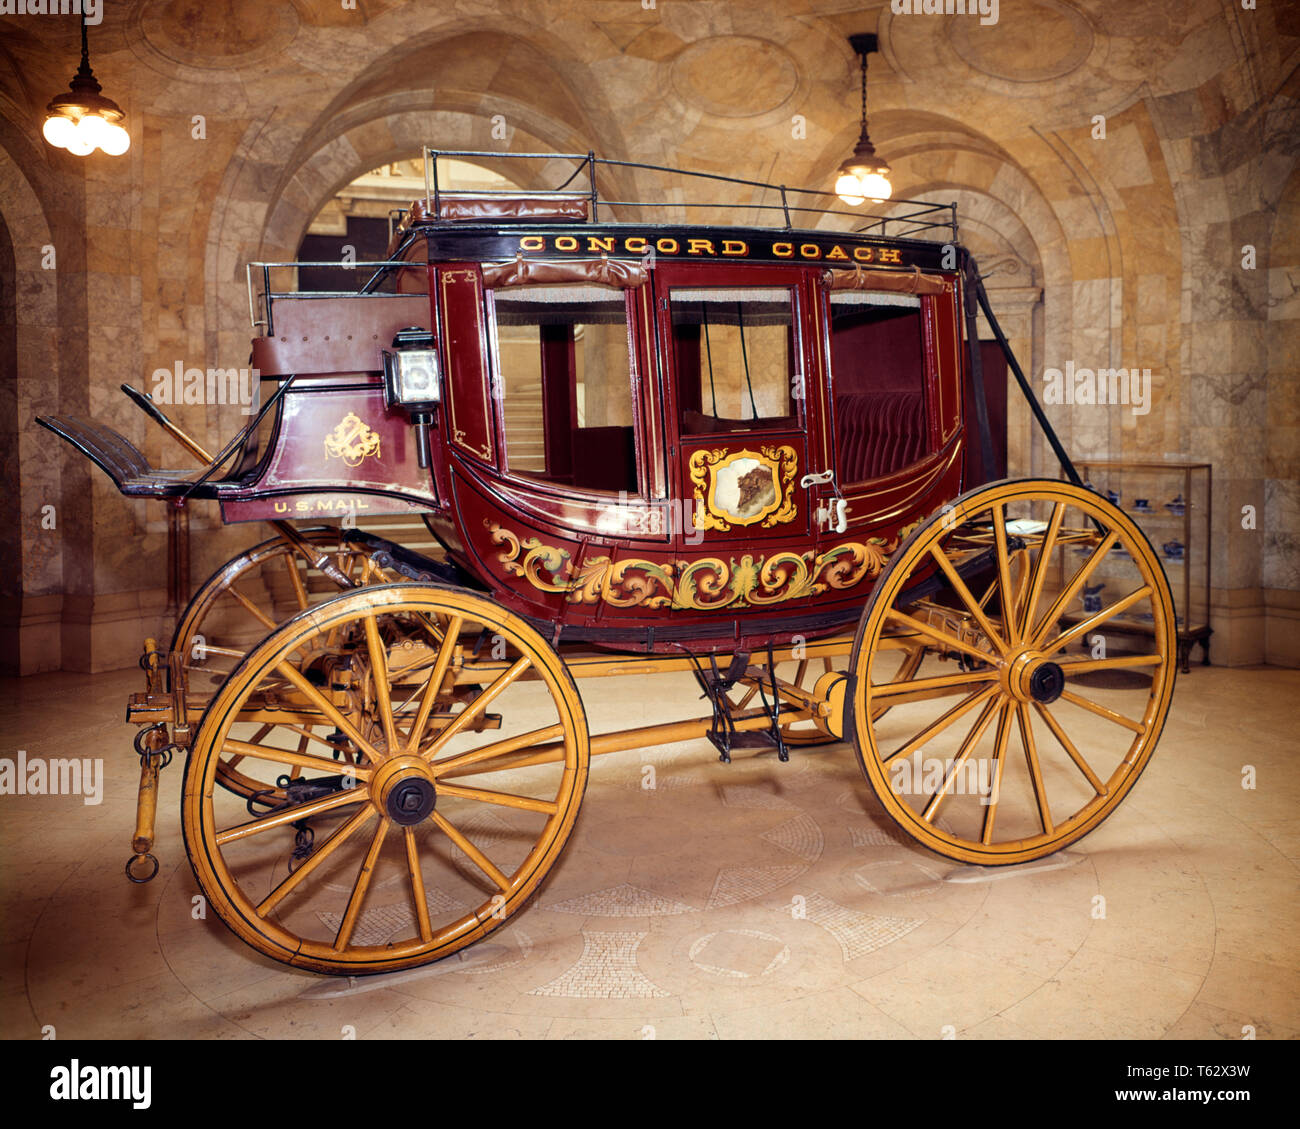 1980s NEW HAMPSHIRE HISTORICAL SOCIETY RED & YELLOW CONCORD COACH STAGECOACH WAGON USED FOR MAIL DELIVERY - kh2265 HAR001 HARS 19TH CENTURY CONCEPTUAL STILL LIFE STAGECOACH STYLISH STAGECOACHES CONCORD CONSTANT ROADS SUITED HAR001 ICONIC NEW HAMPSHIRE NH OLD FASHIONED SUSPENSION Stock Photo